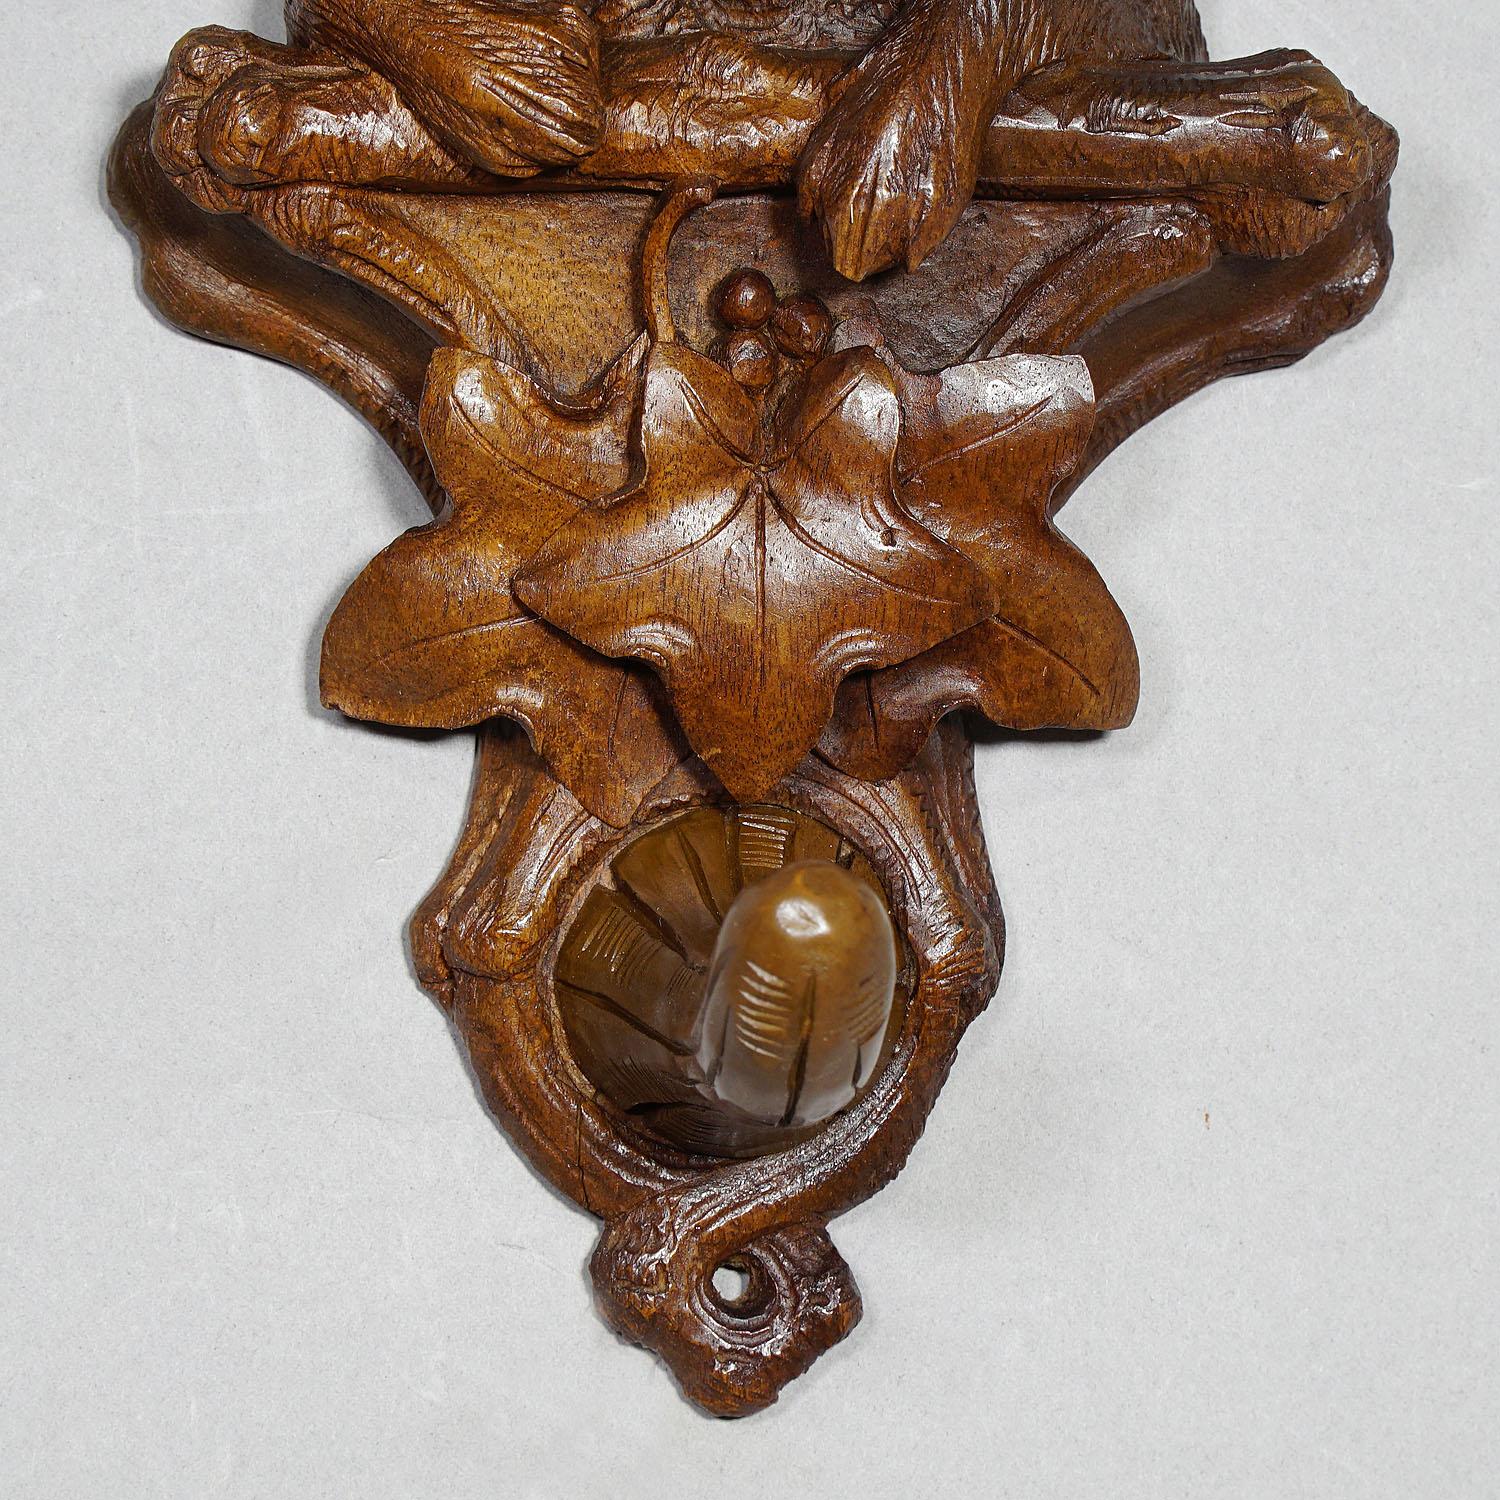 Swiss Rustic Black Forest Carved Wooden Coat Hook with Dog